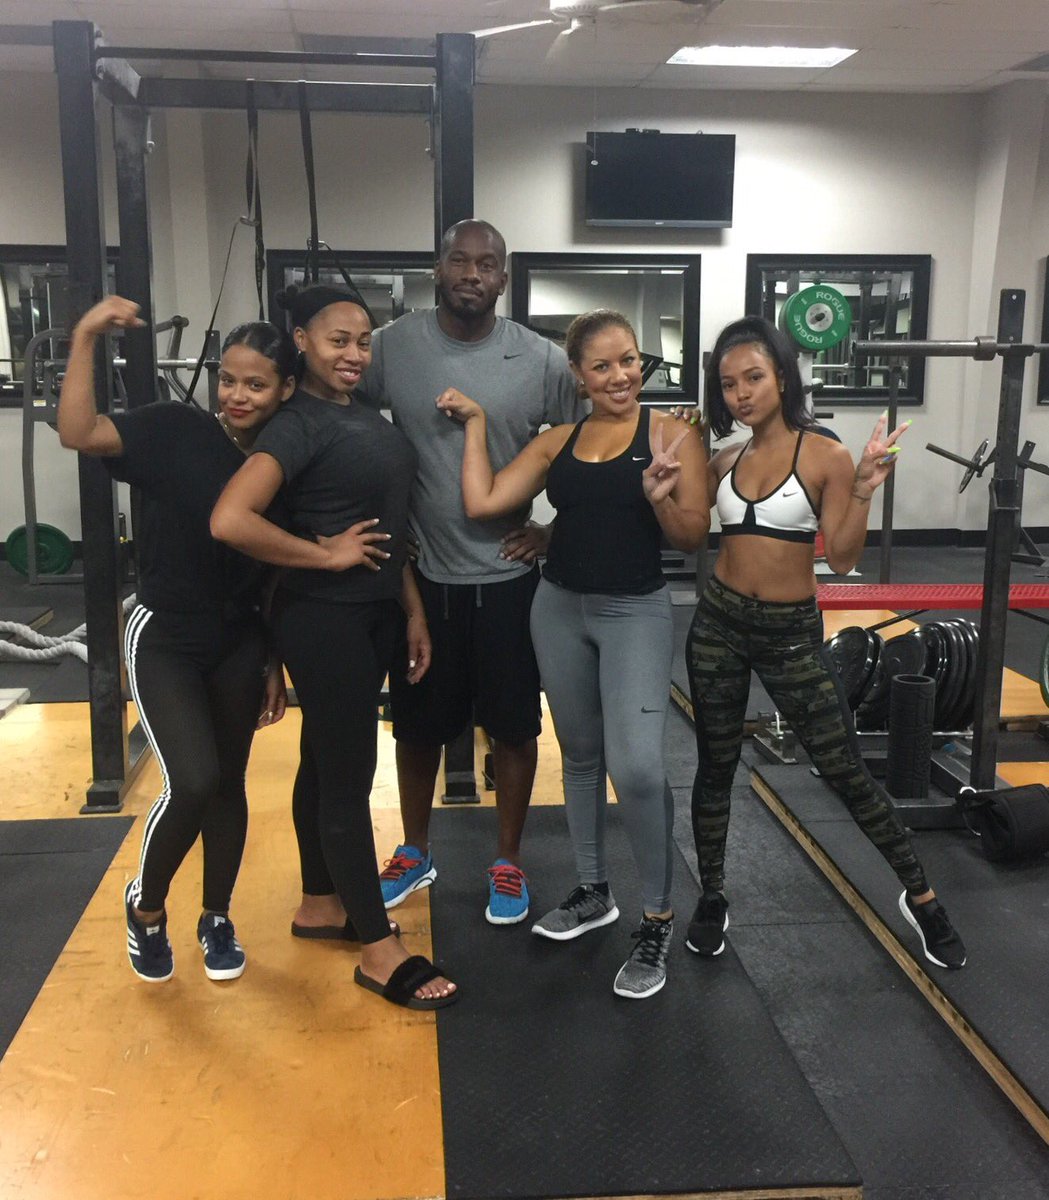 RT @DJ_Fitness: Had a great time last night with this group of girls. They came in and worked hard???????? https://t.co/3CddKkWx9S